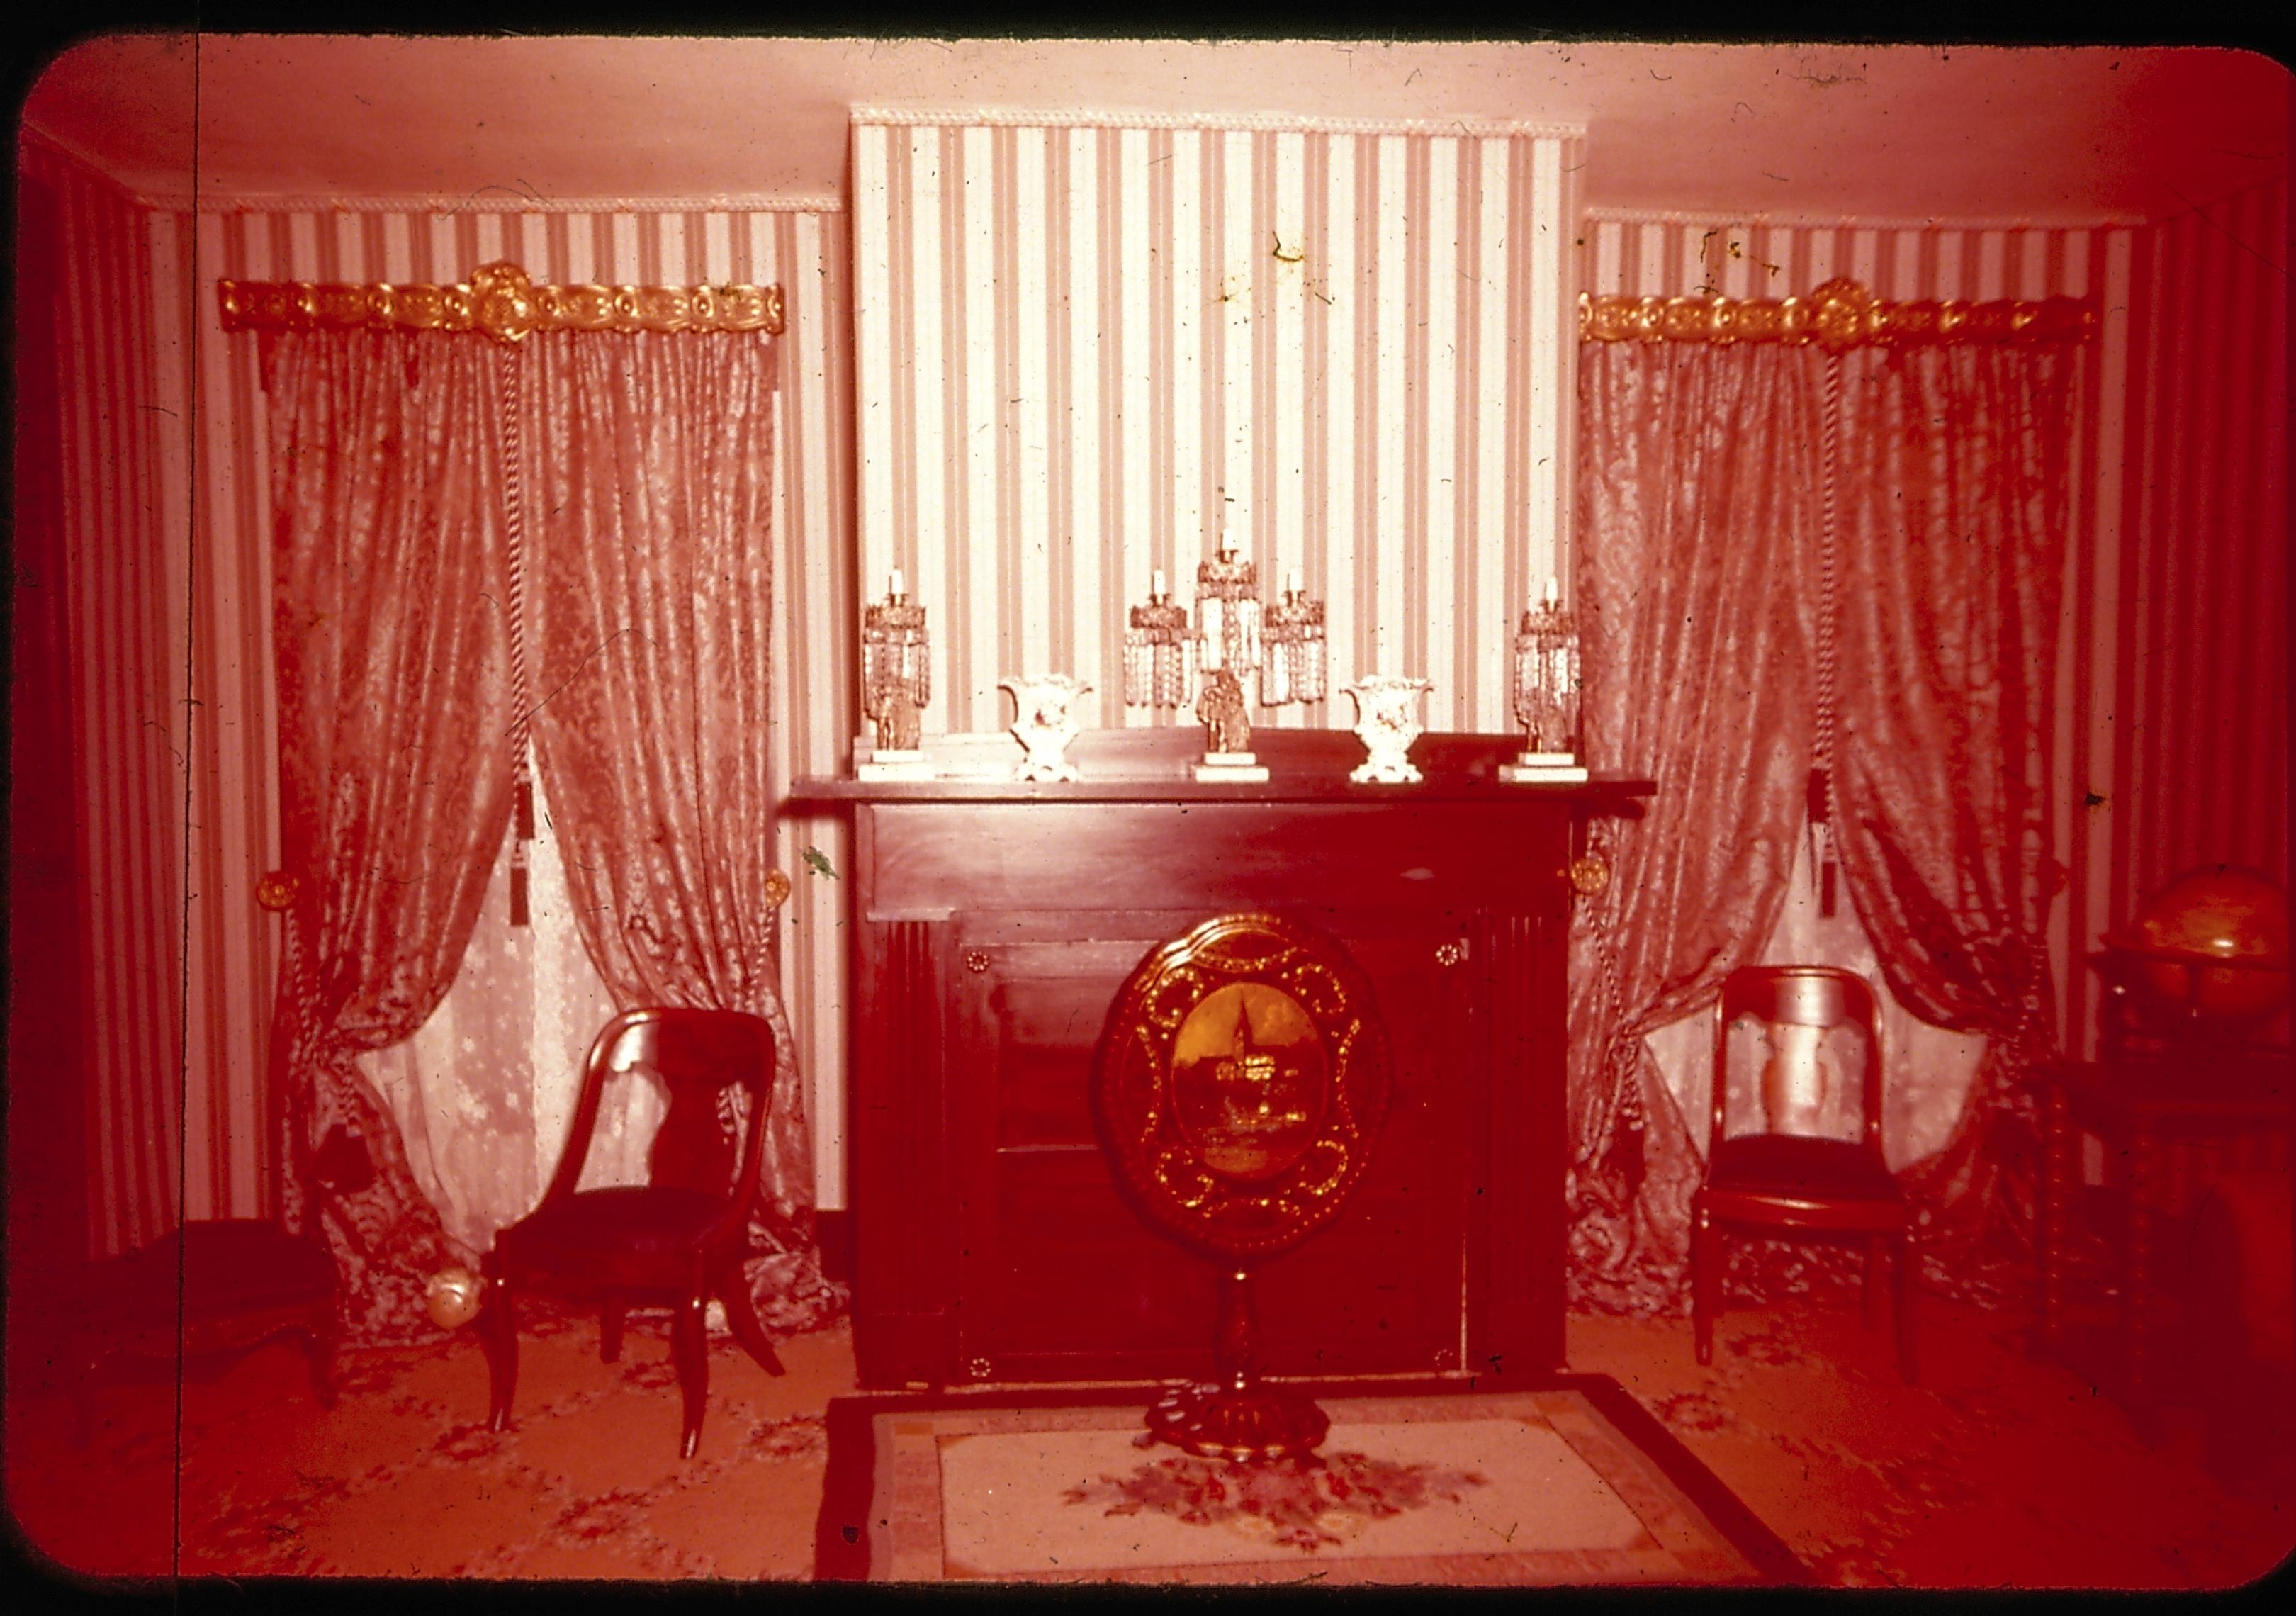 Lincoln home rear parlor, north wall (fireplace). Lincoln Home NHS- Souvenir Set, 60W set 1, L-204, Z204 Lincoln, souvenir, slide